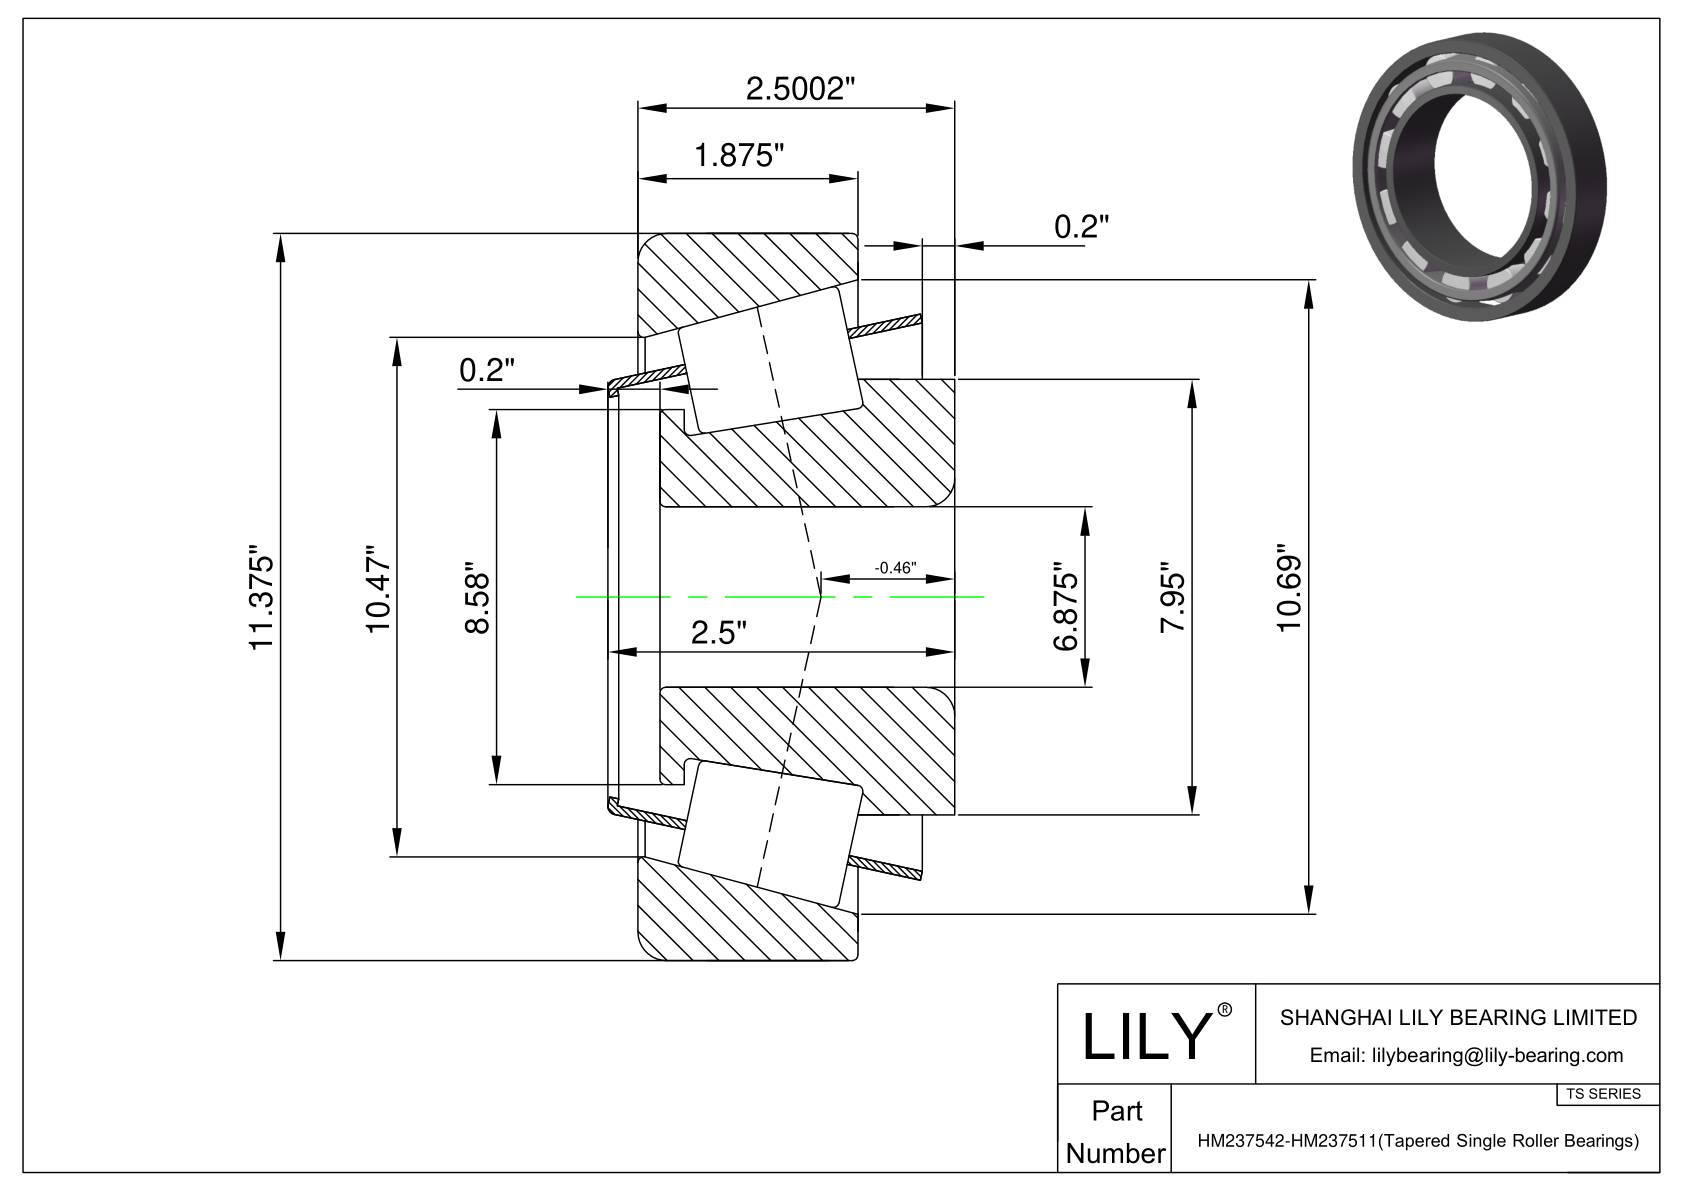 HM237542-HM237511 TS (Tapered Single Roller Bearings) (Imperial) cad drawing